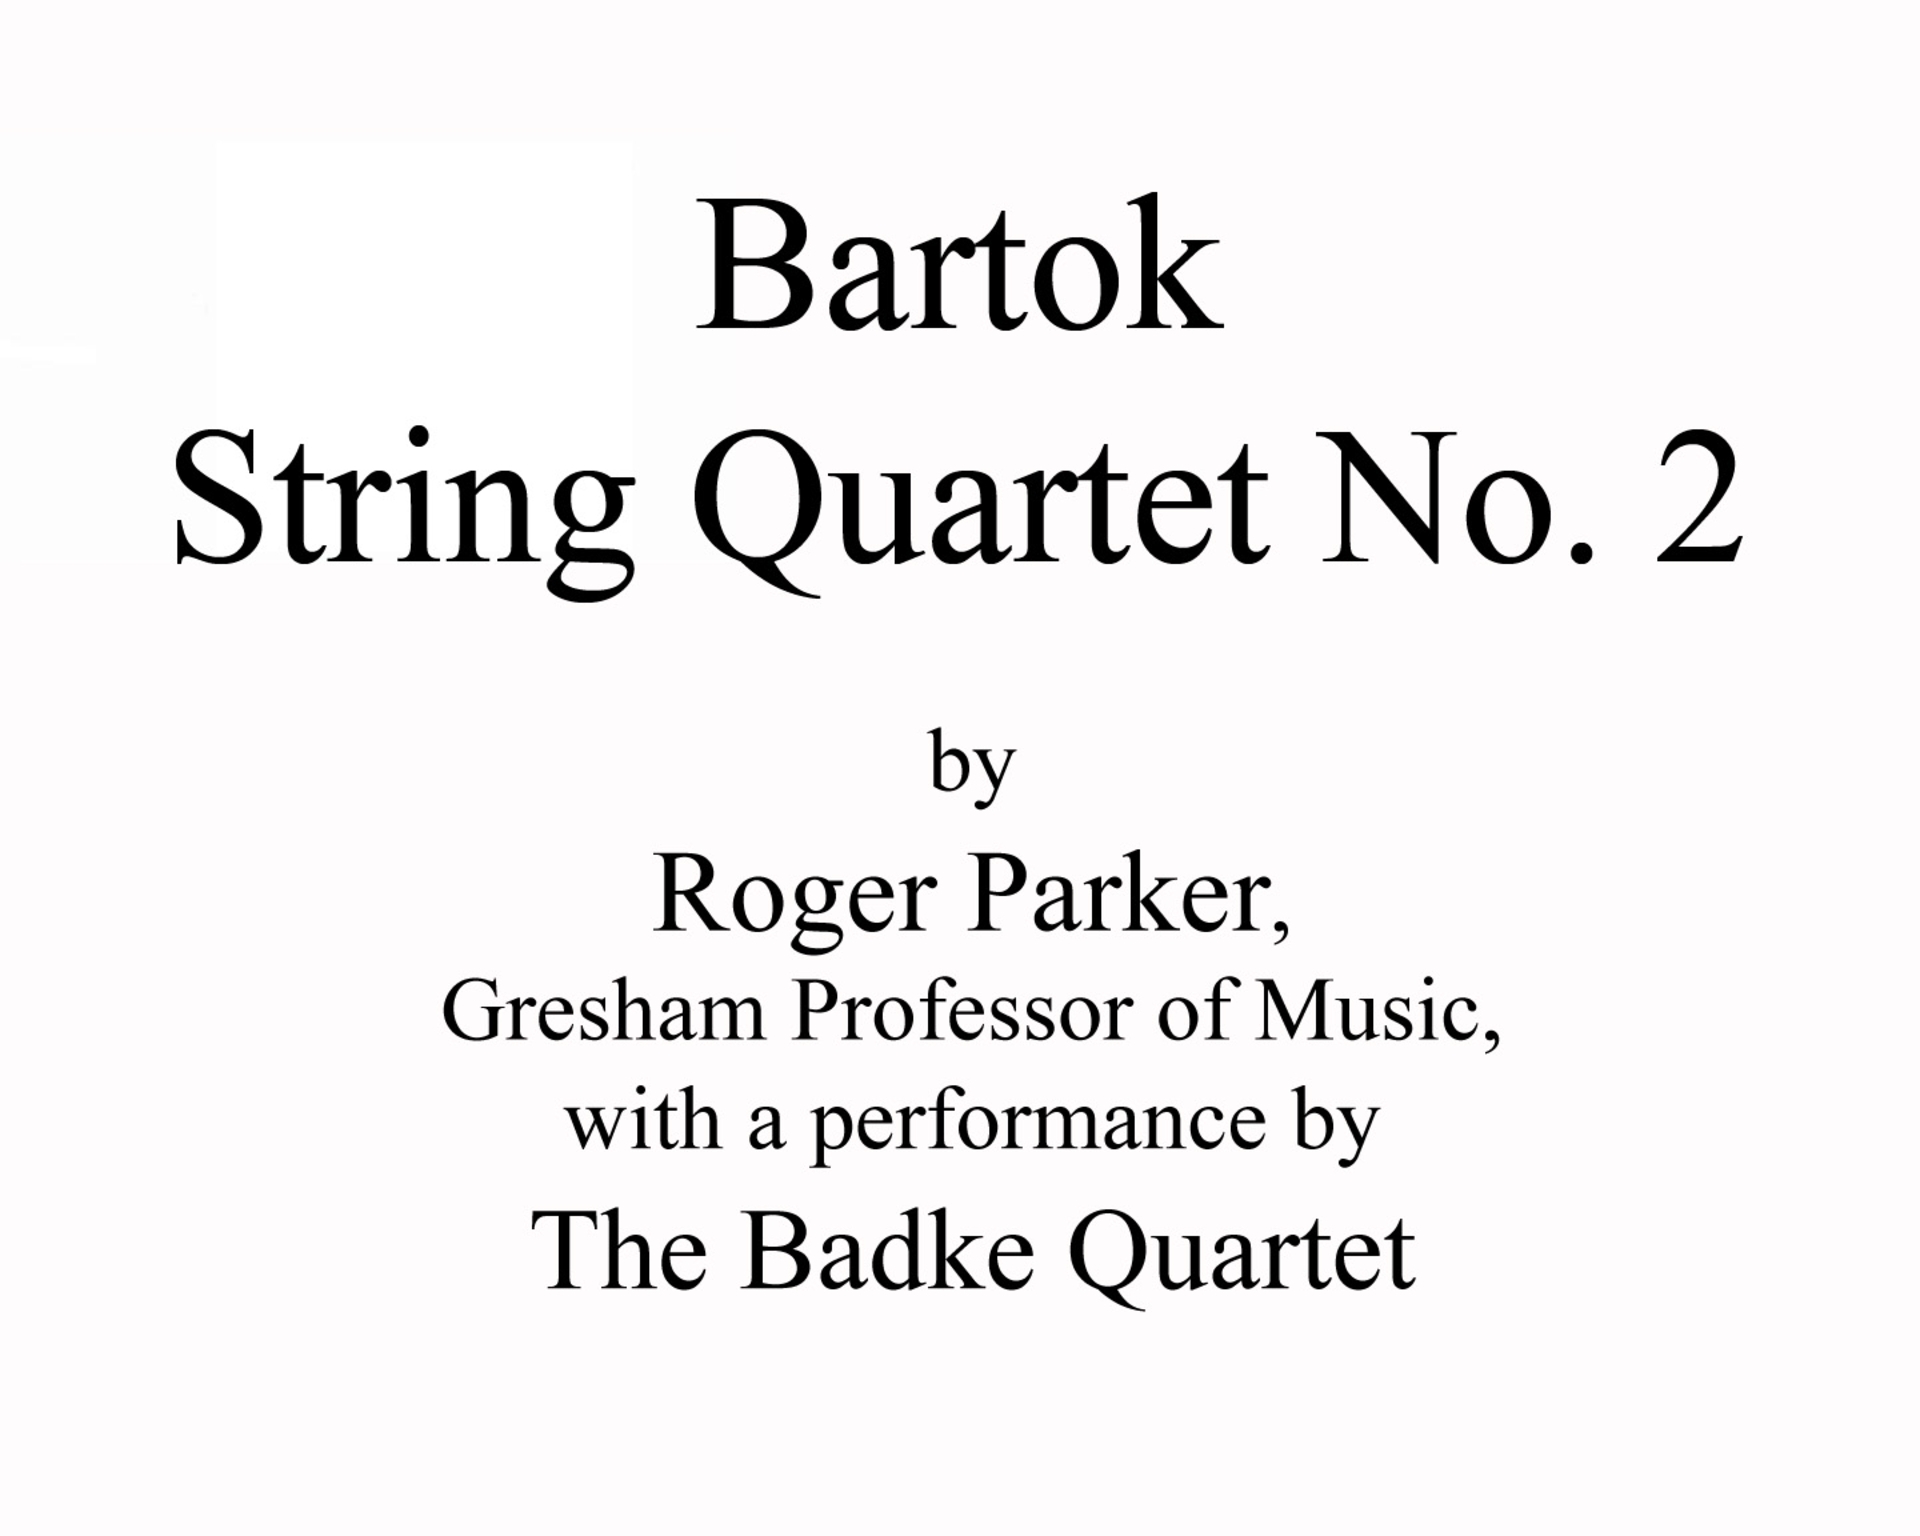 In the wake of Bartók